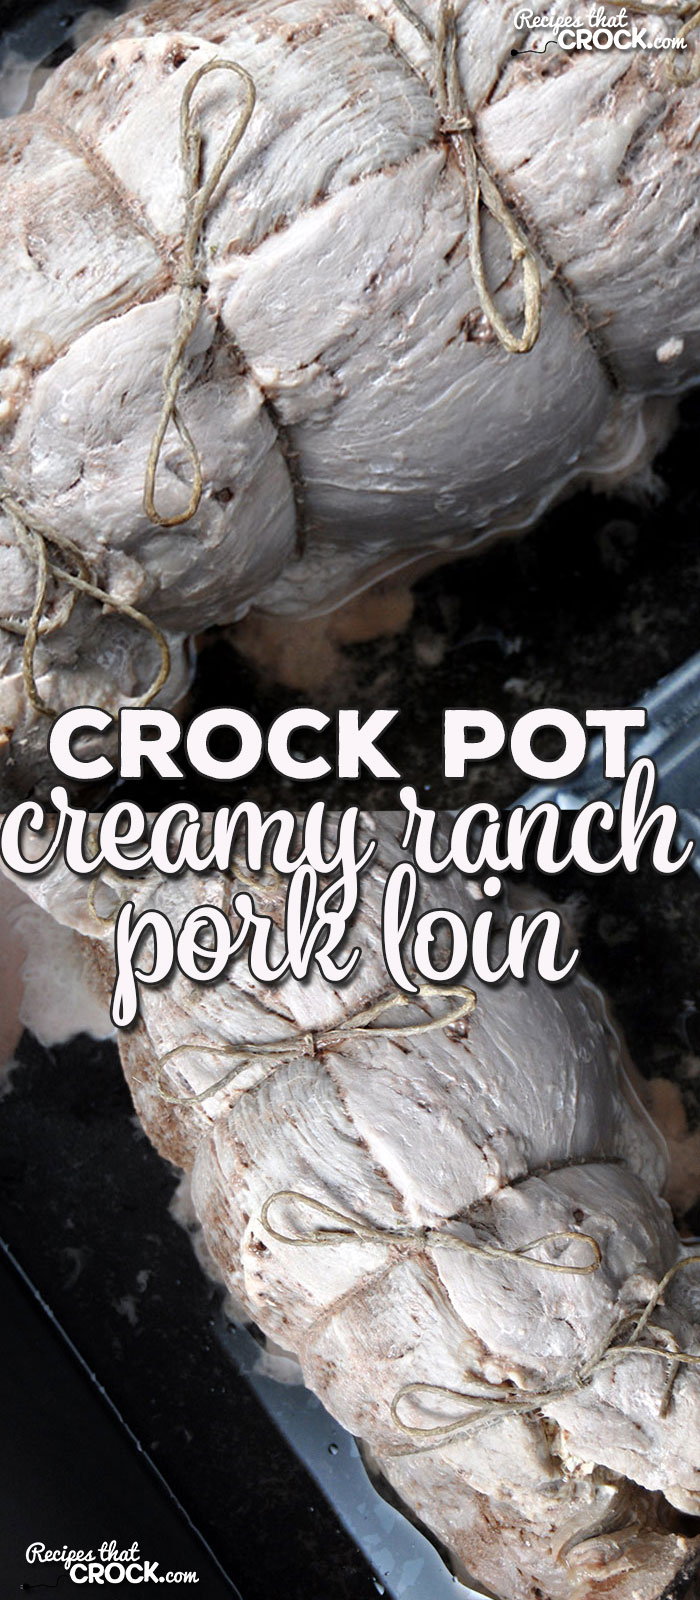 Need an easy recipe to throw together that still looks all fancy? Look no further! This Creamy Ranch Crock Pot Pork Loin is super easy with a little flare!